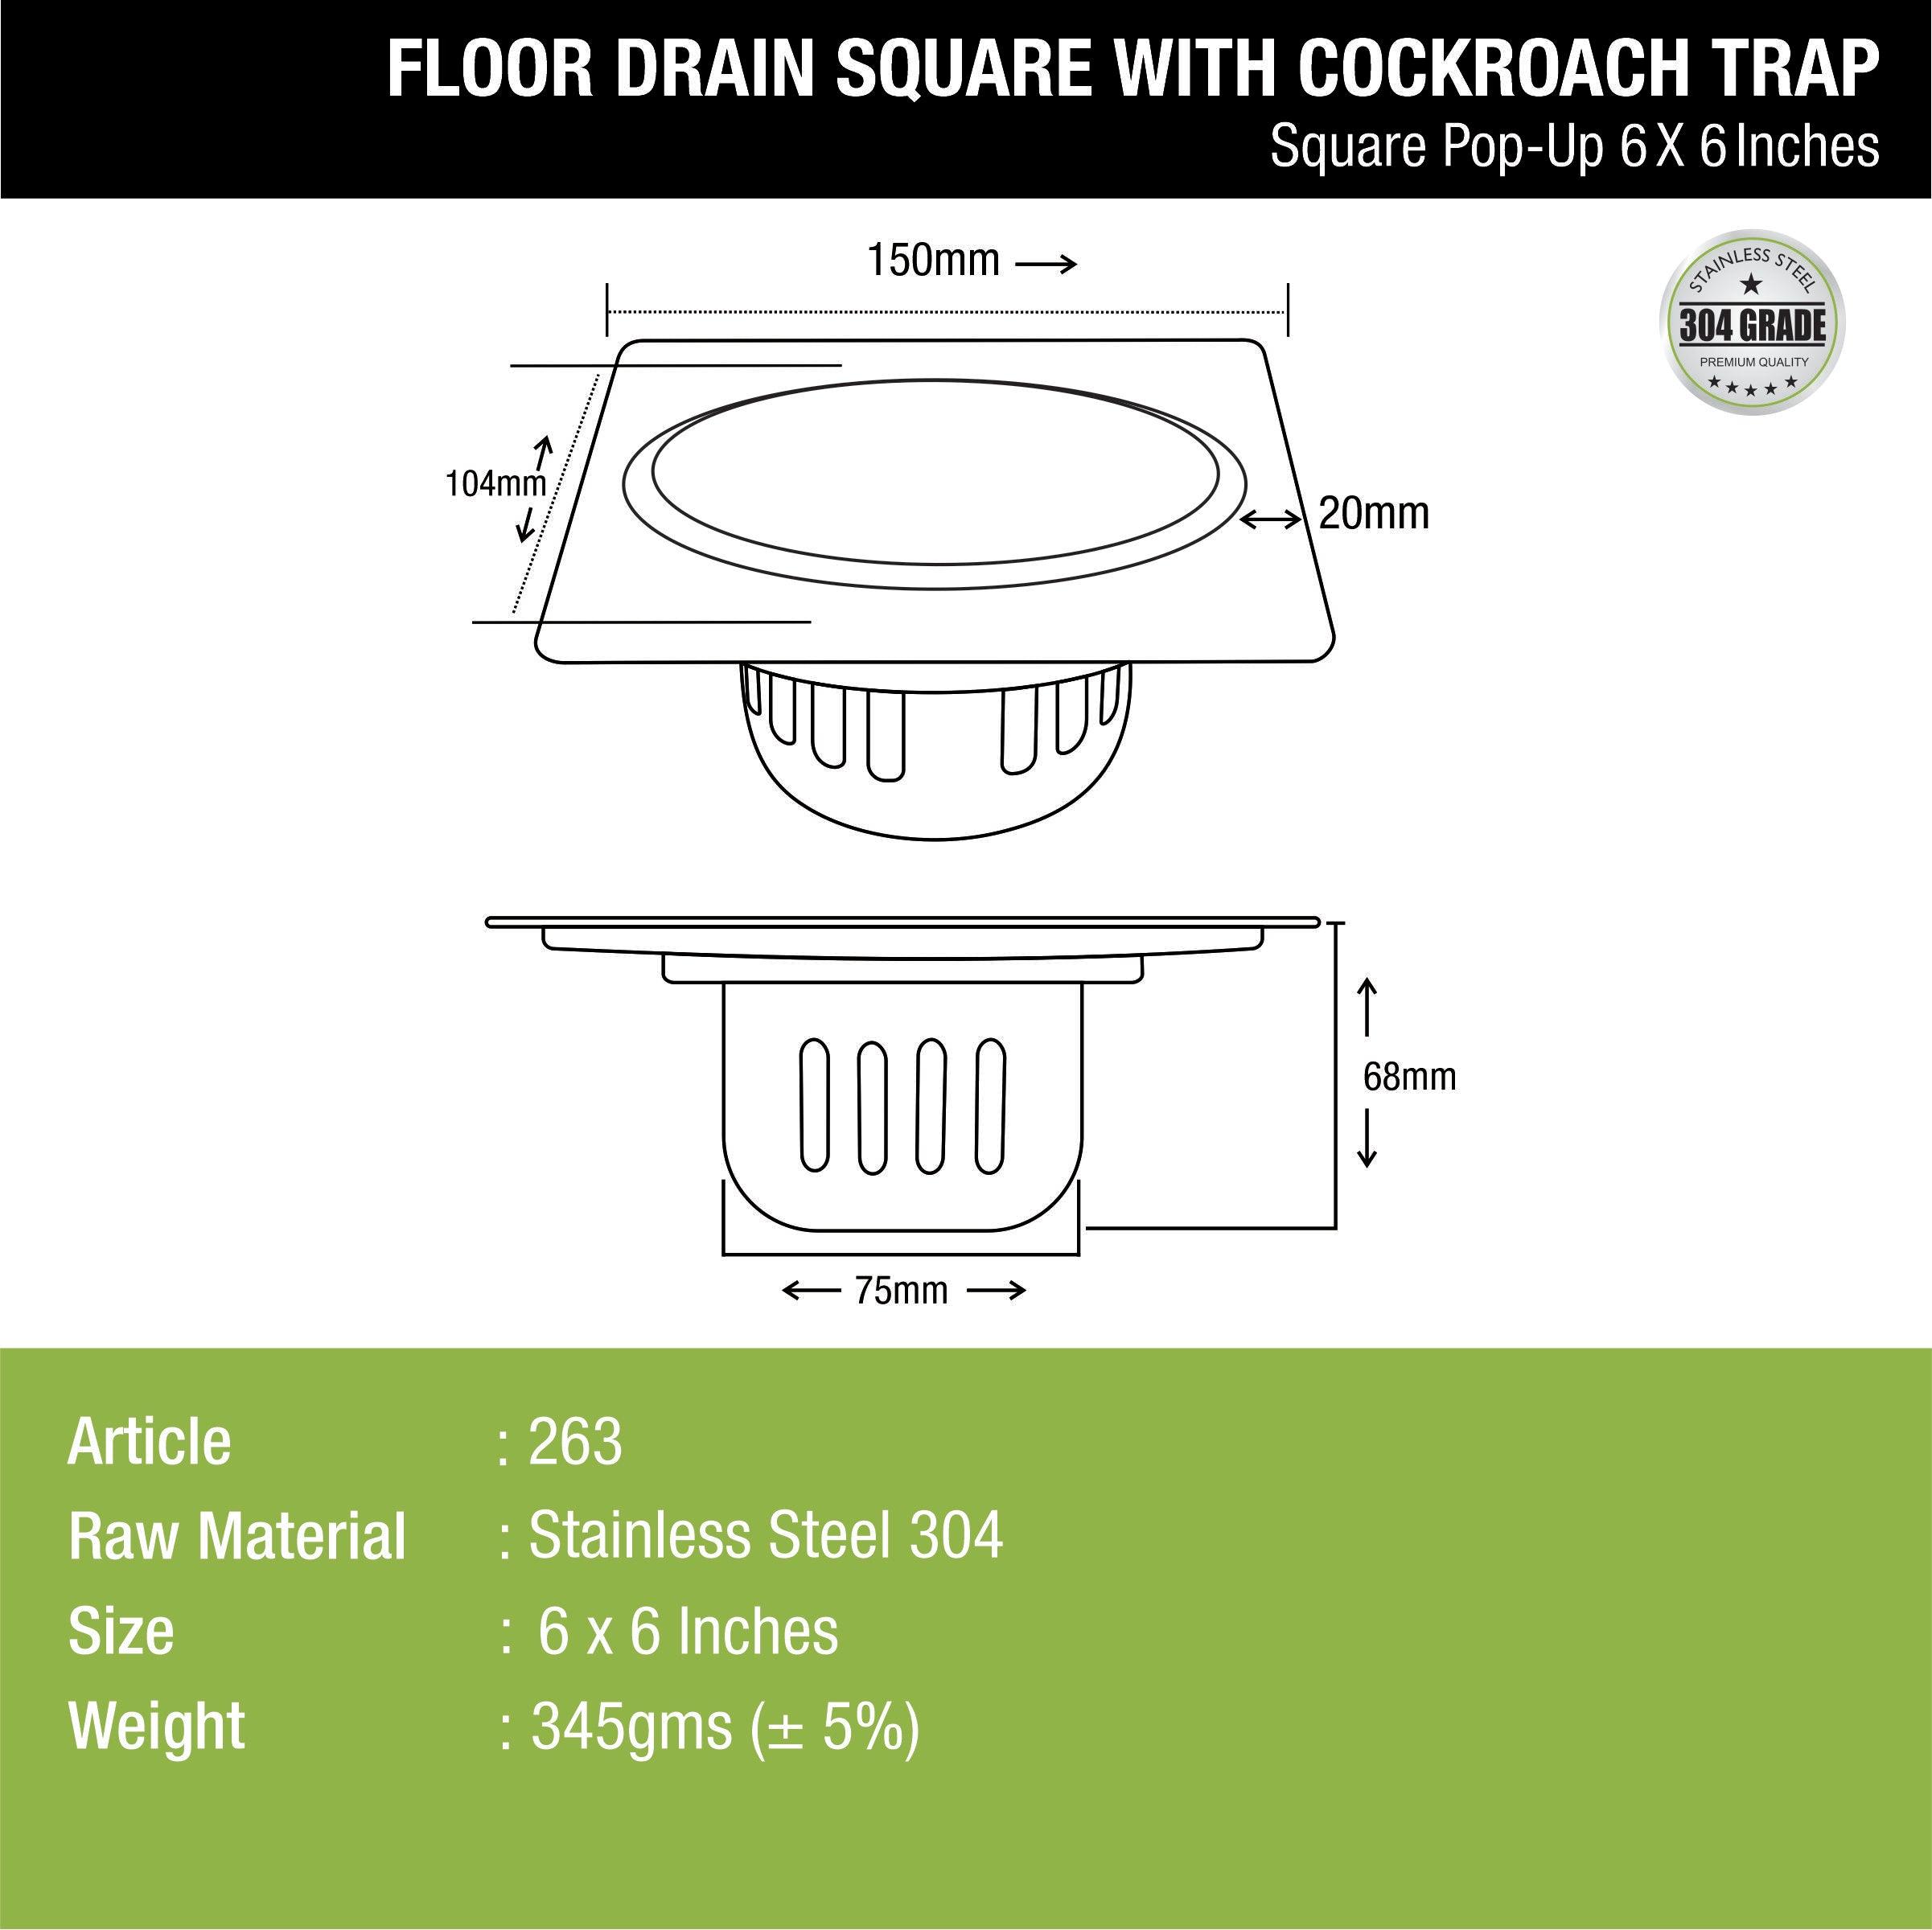 Pop-up Square Floor Drain (6 x 6 Inches) with Cockroach Trap - LIPKA